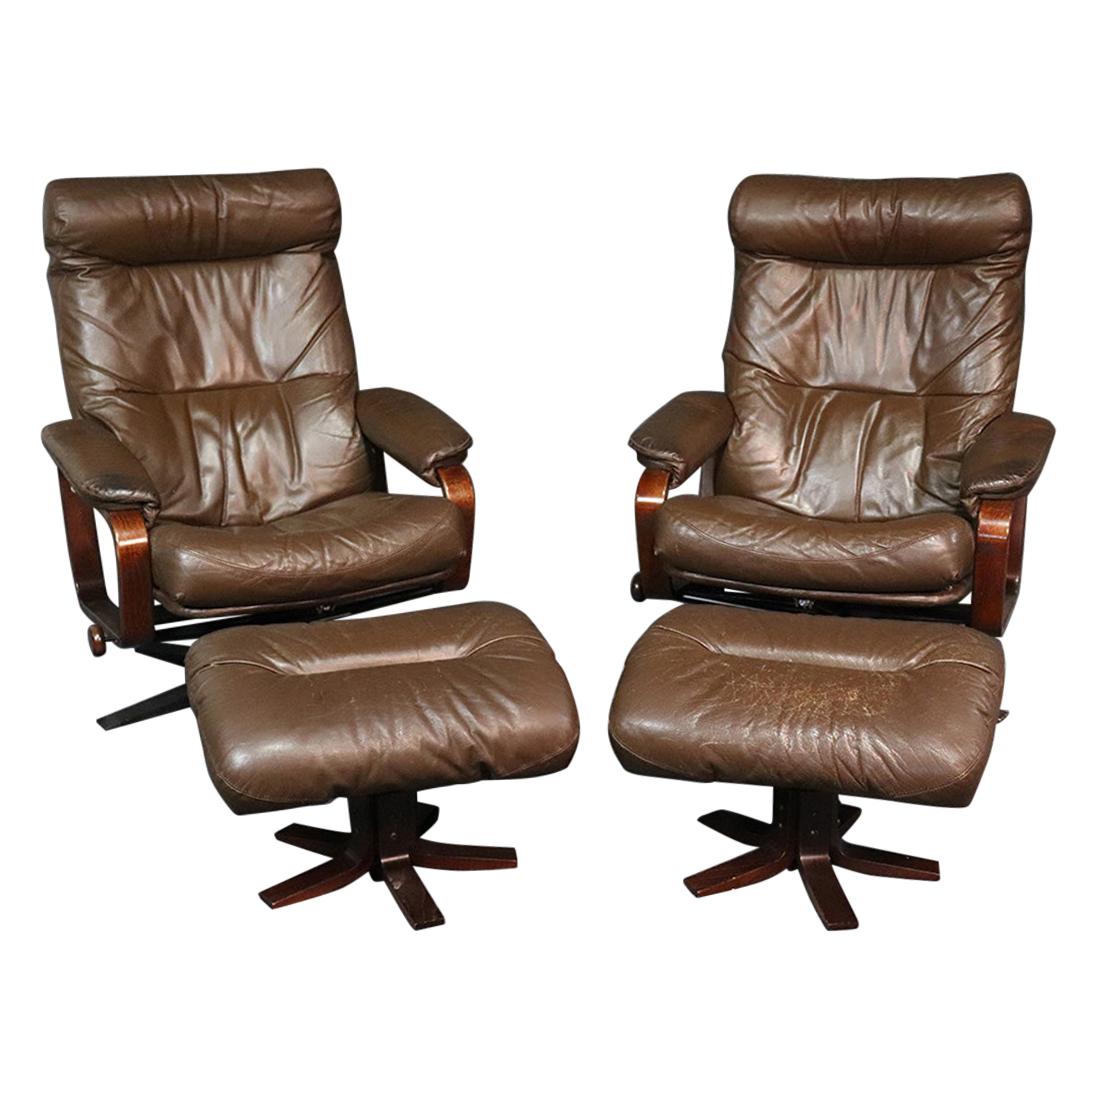 Skippers Mobler Pair of Leather Signed Danish Modern Reclining Chairs W Ottomans